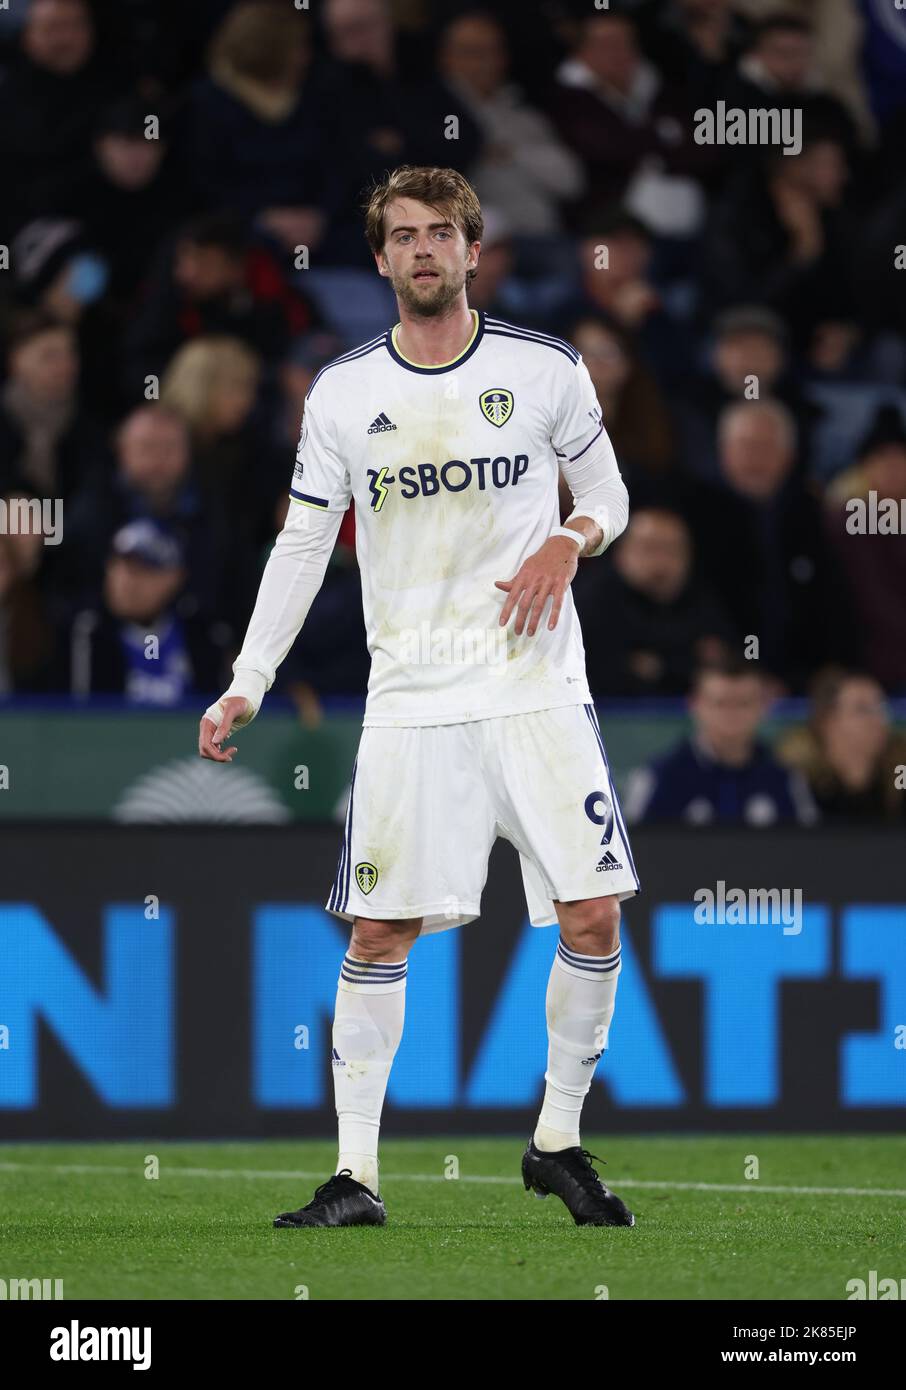 Leicester, UK. 20th Oct, 2022. Patrick Bamford (LU) at the Leicester City v Leeds United EPL Premier League match, at King Power Stadium, Leicester, UK, on October 20, 2022 Credit: Paul Marriott/Alamy Live News Stock Photo